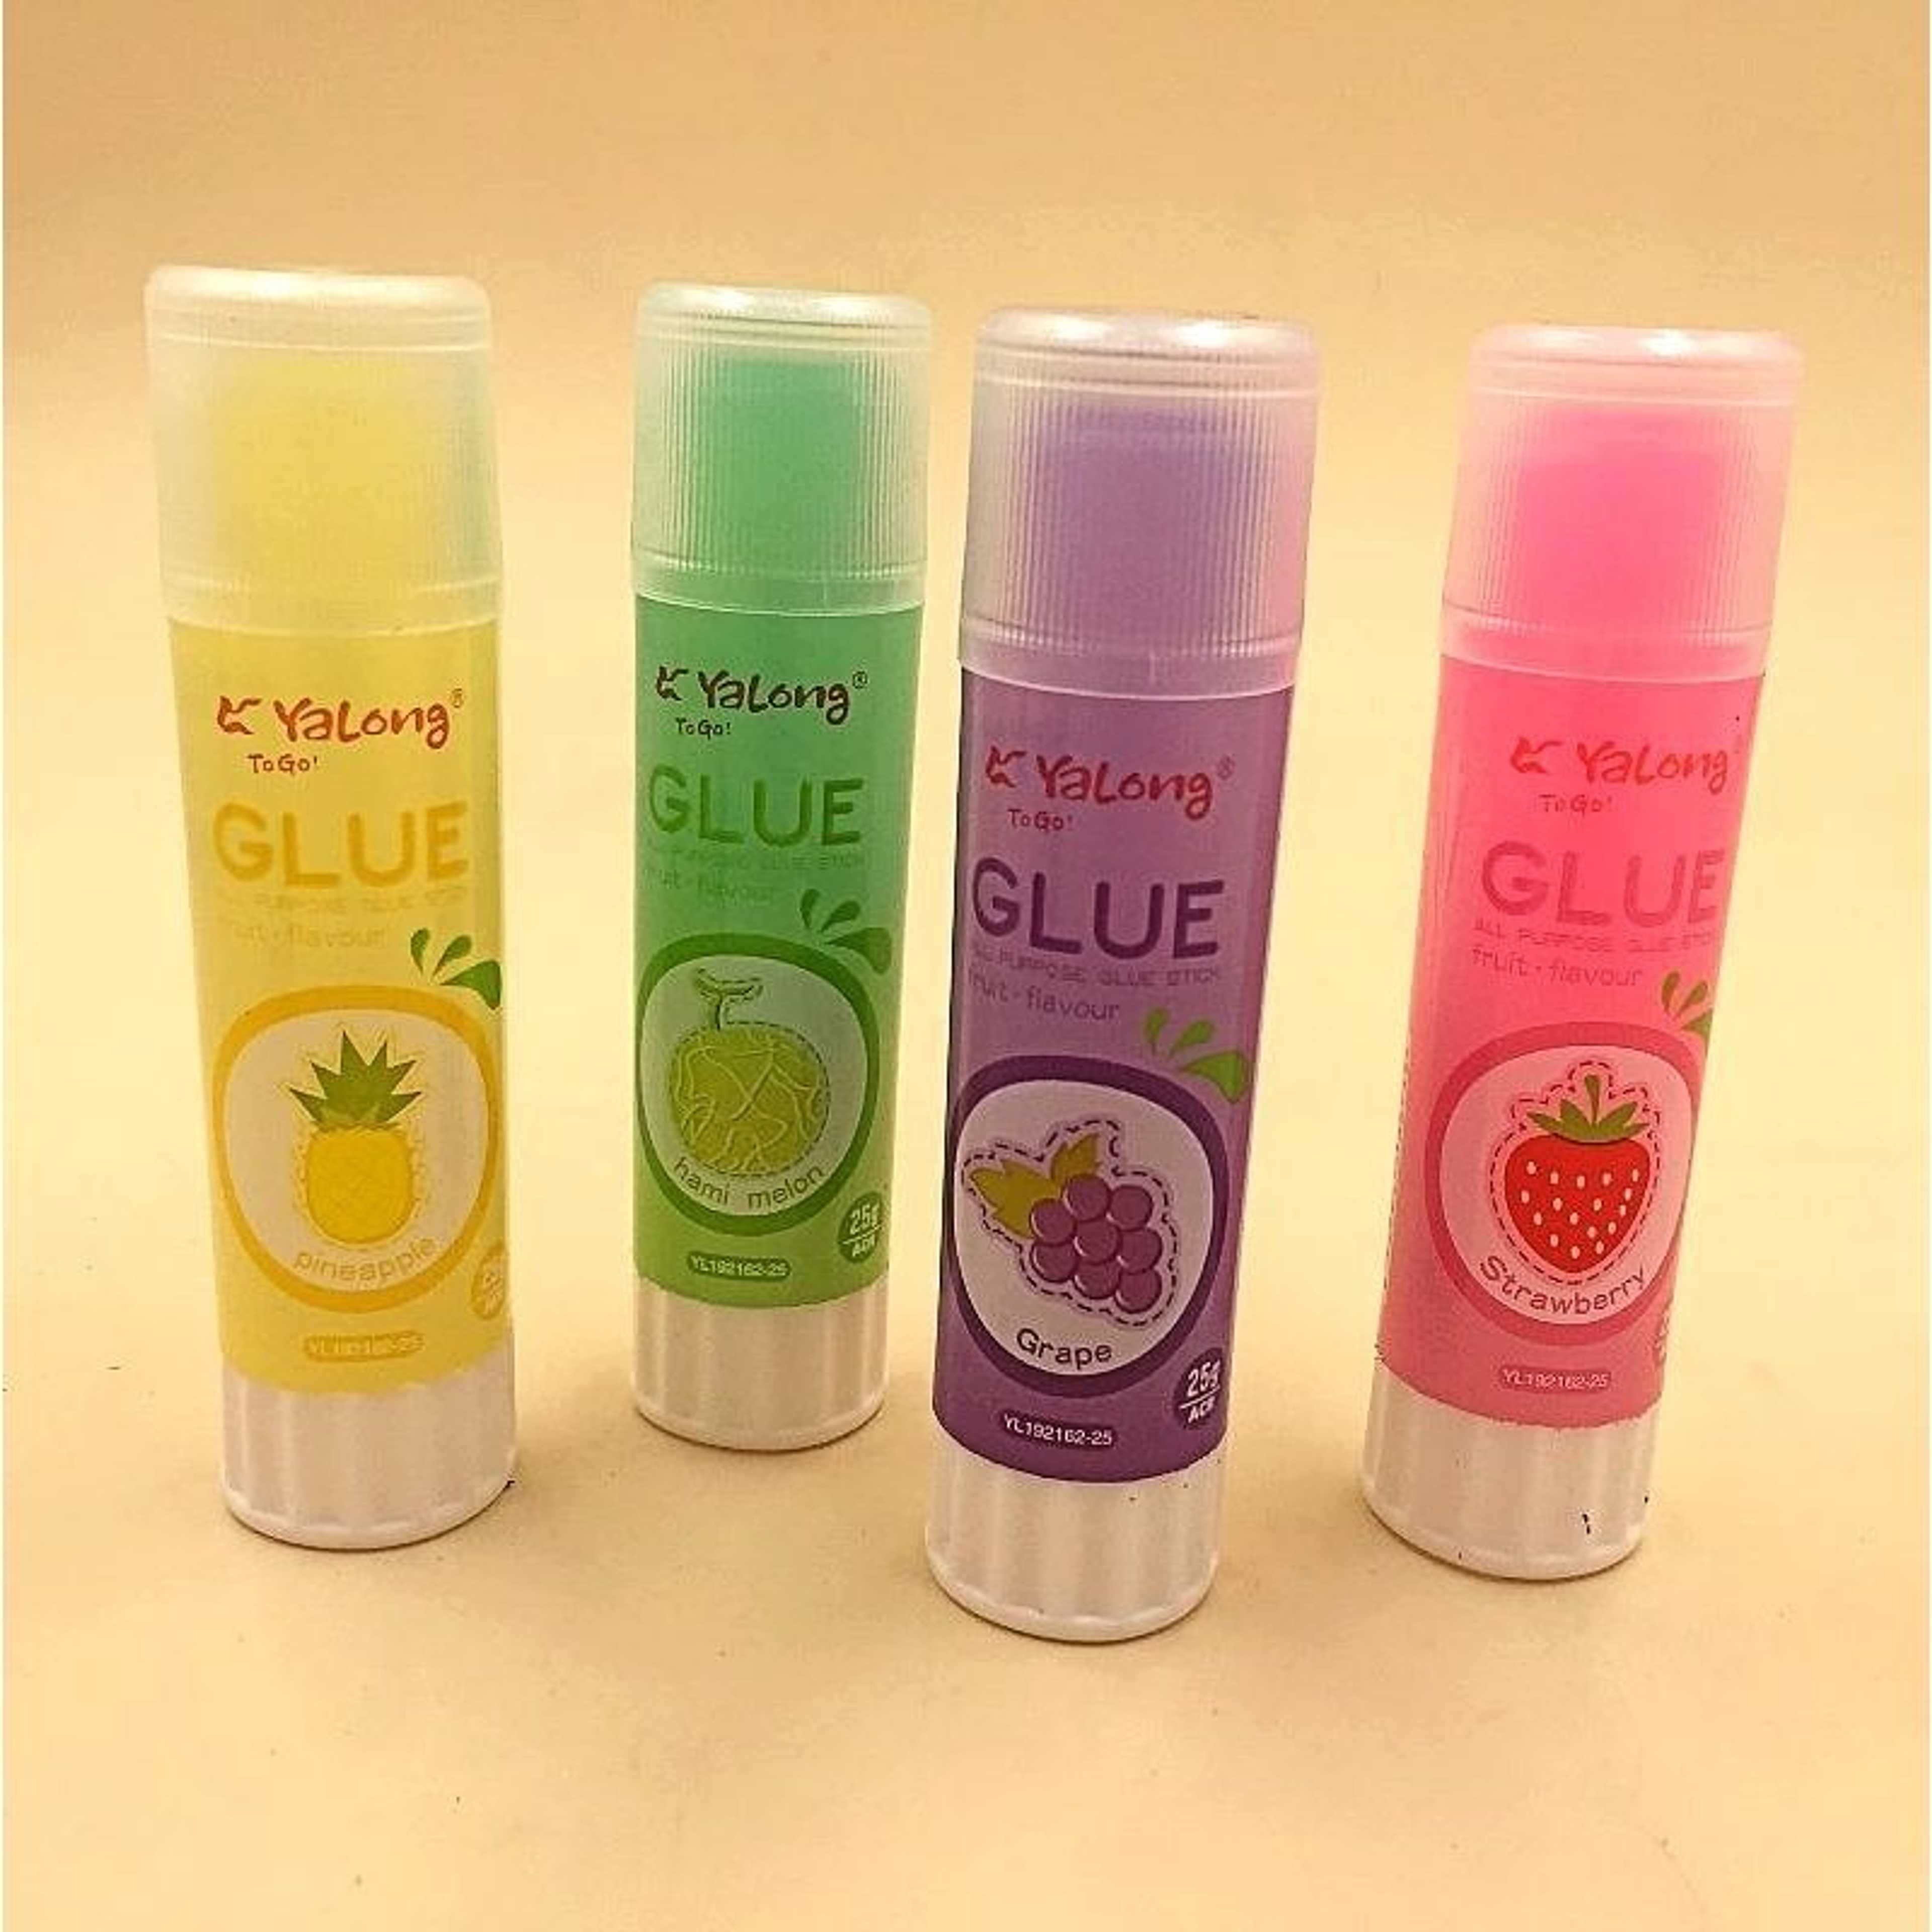 Pack of 4 - Fruit Flavors Glue Stick for Arts & Crafts Activities